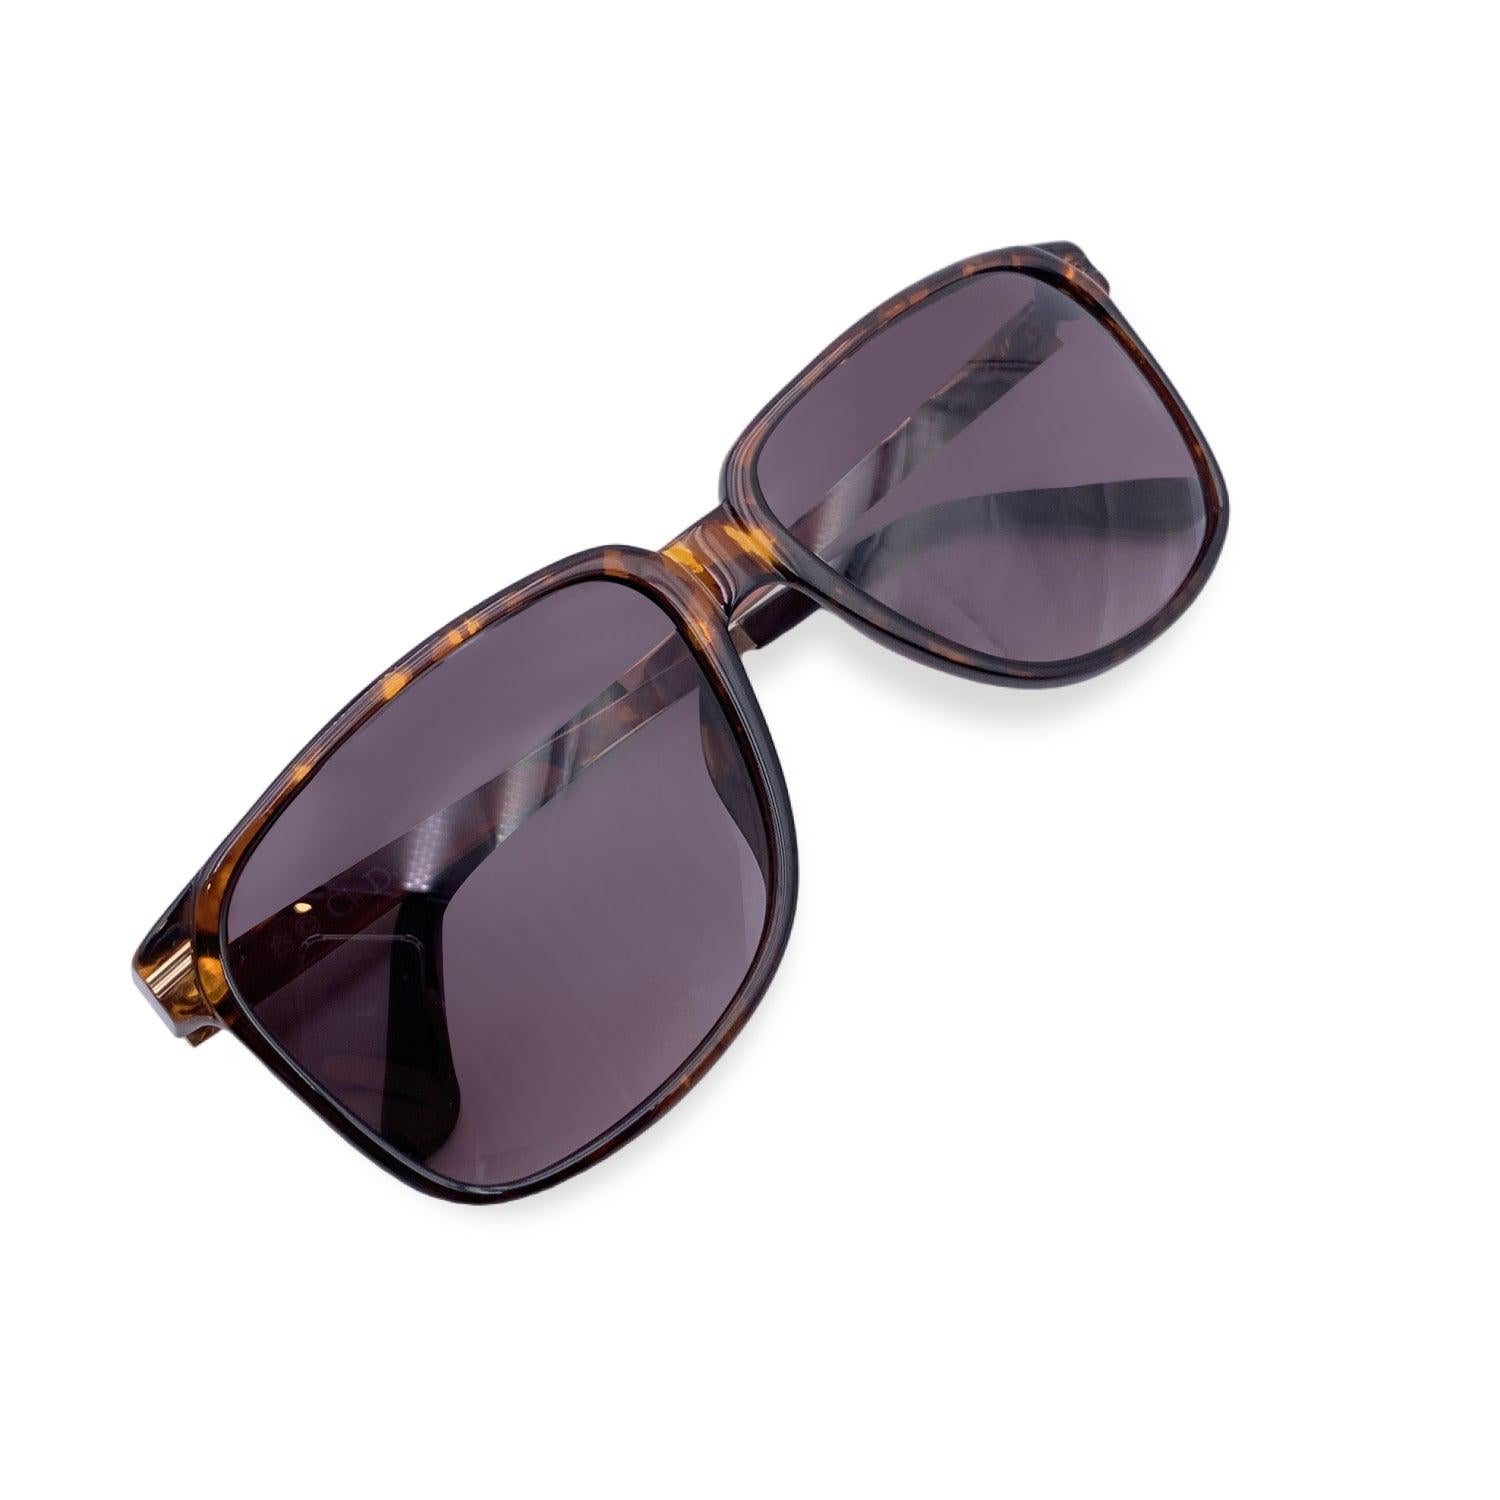 Vintage Christian Dior Monsieur Unisex Sunglasses, Mod. 2460 10 Optyl. Size: 60/16 140mm. Brown acetate frame, with gold metal finish on the sides. . 100% Total UVA/UVB protection brown gradient lenses. CD logos on temples. Condition A+ - MINT Never